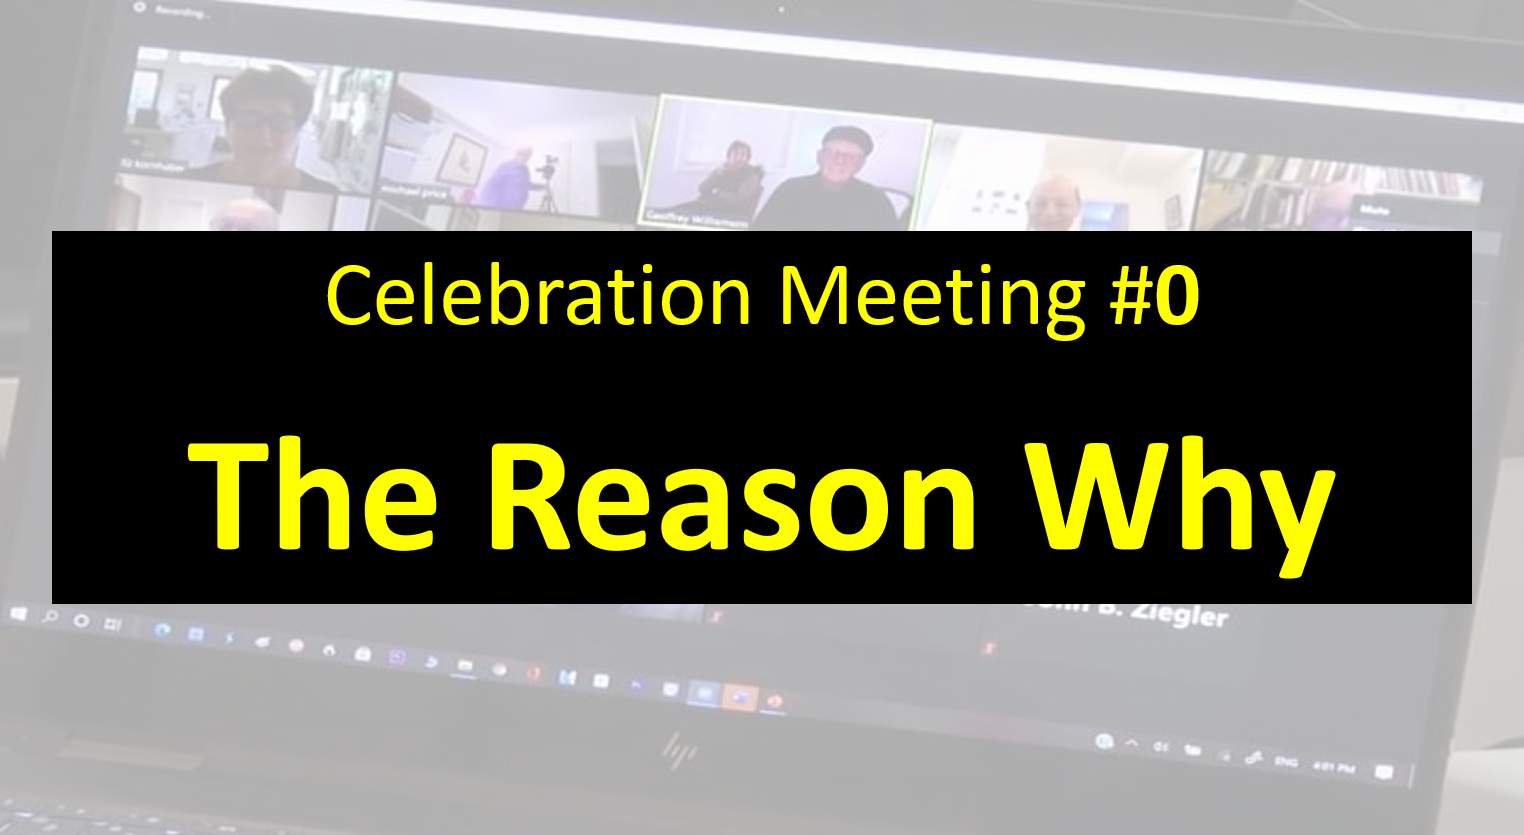 Celebration Meeting - #0 The Reason Why